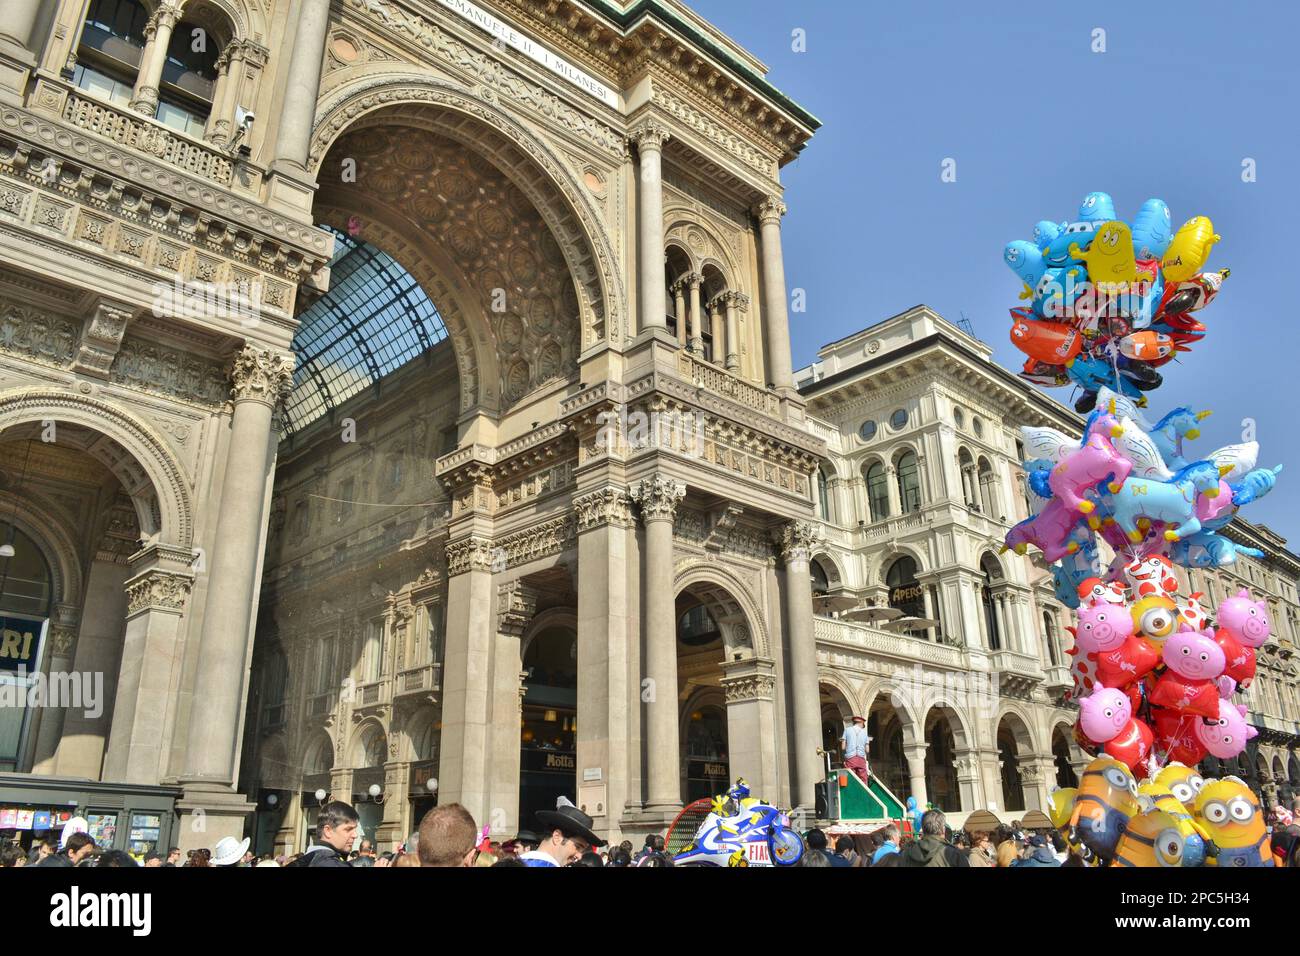 People celebrating Carnival in Duomo square of Milan in front of Vittorio Emanuele II Gallery fashion mall. Hapèpy crowd and colorful balloons. Stock Photo